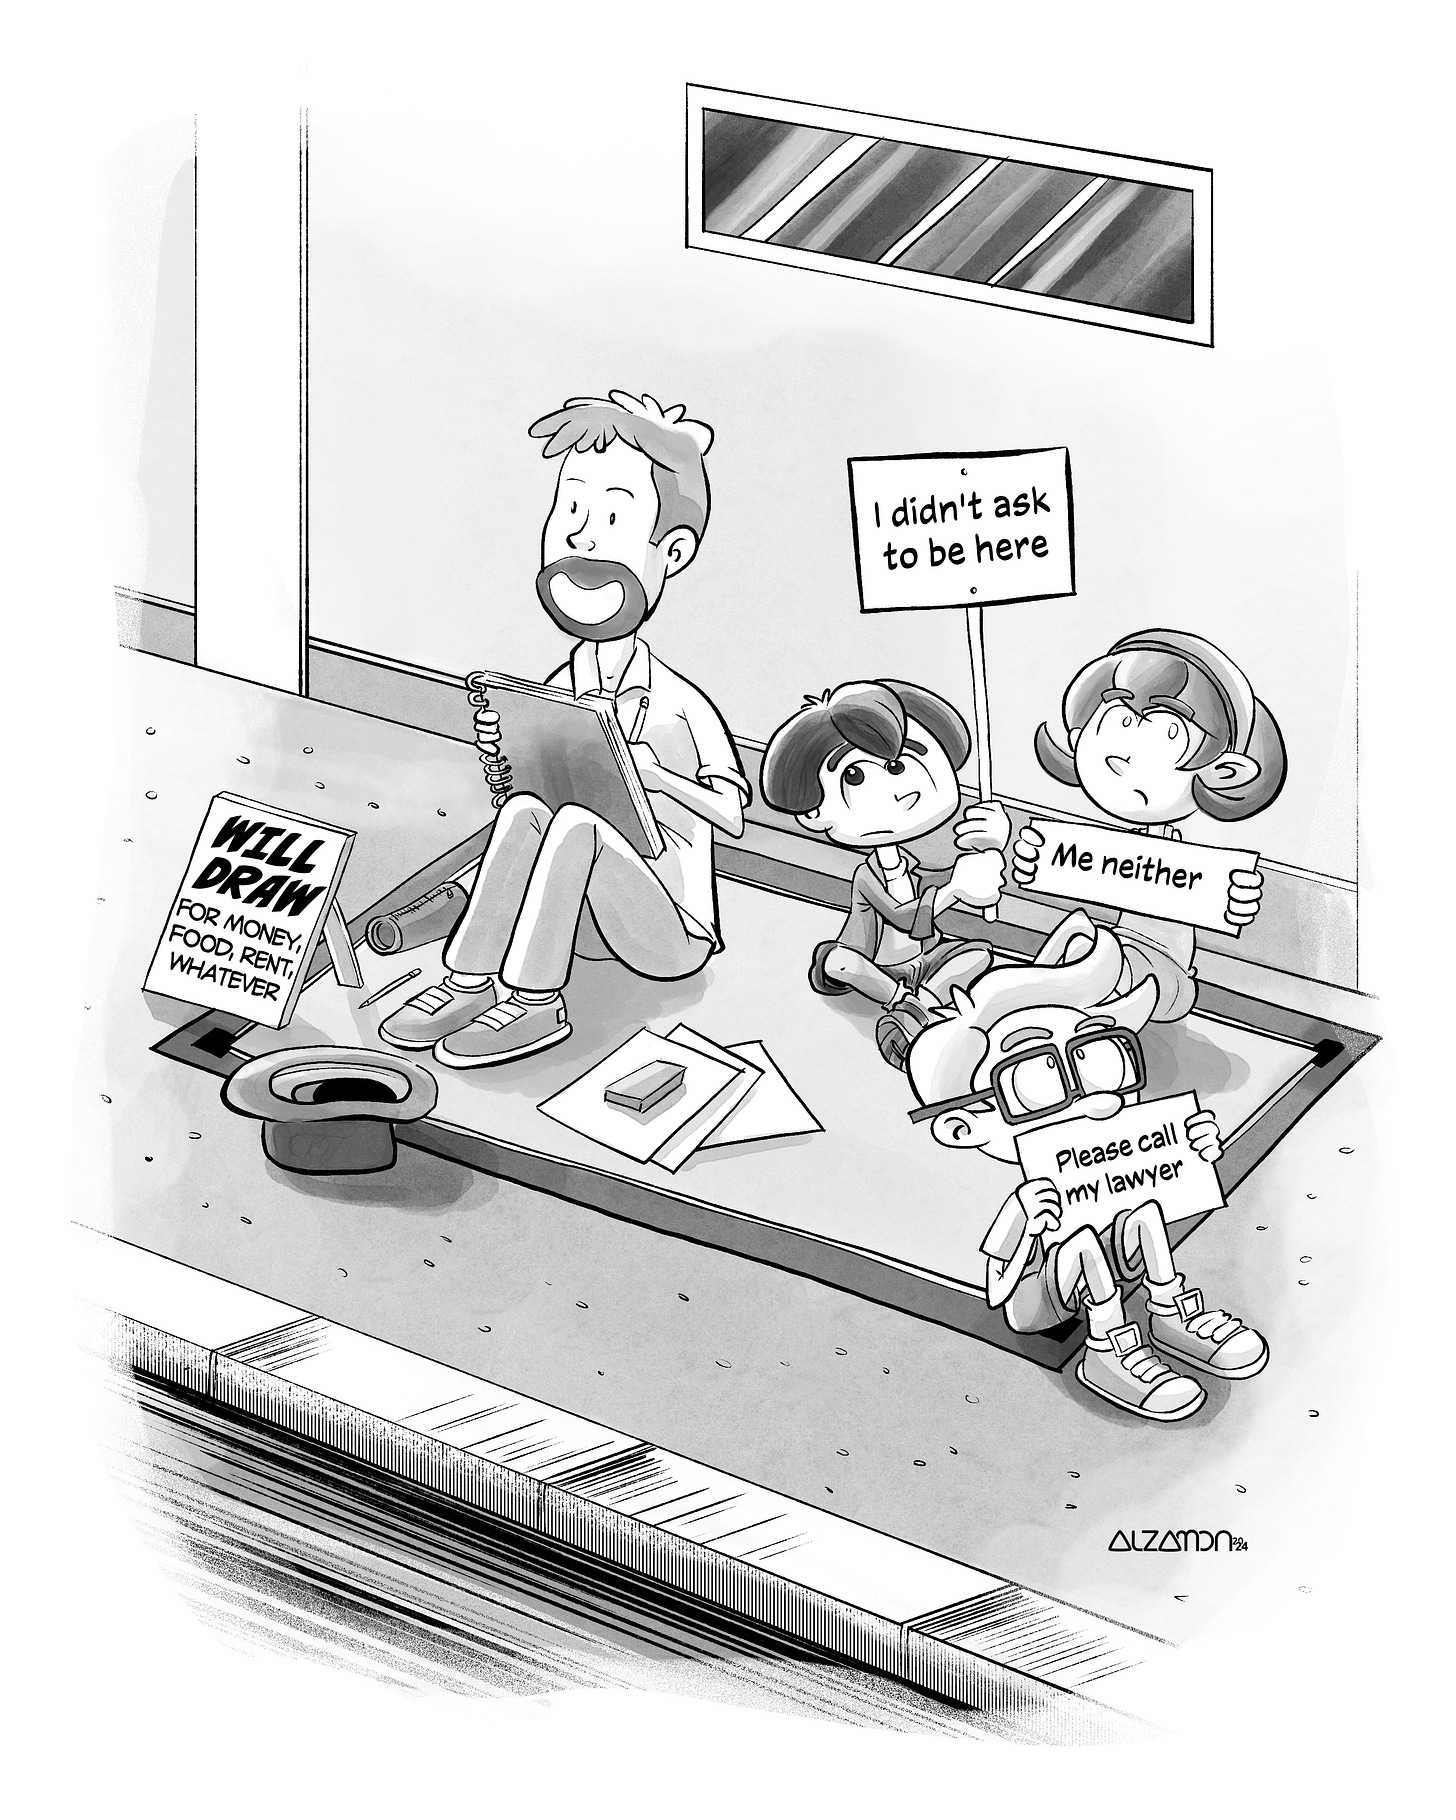 Self caricature of yours truly as a street cartoonist with a sign of "Will Draw for money, food, rent, whatever" while my kid characters join in silent protest.